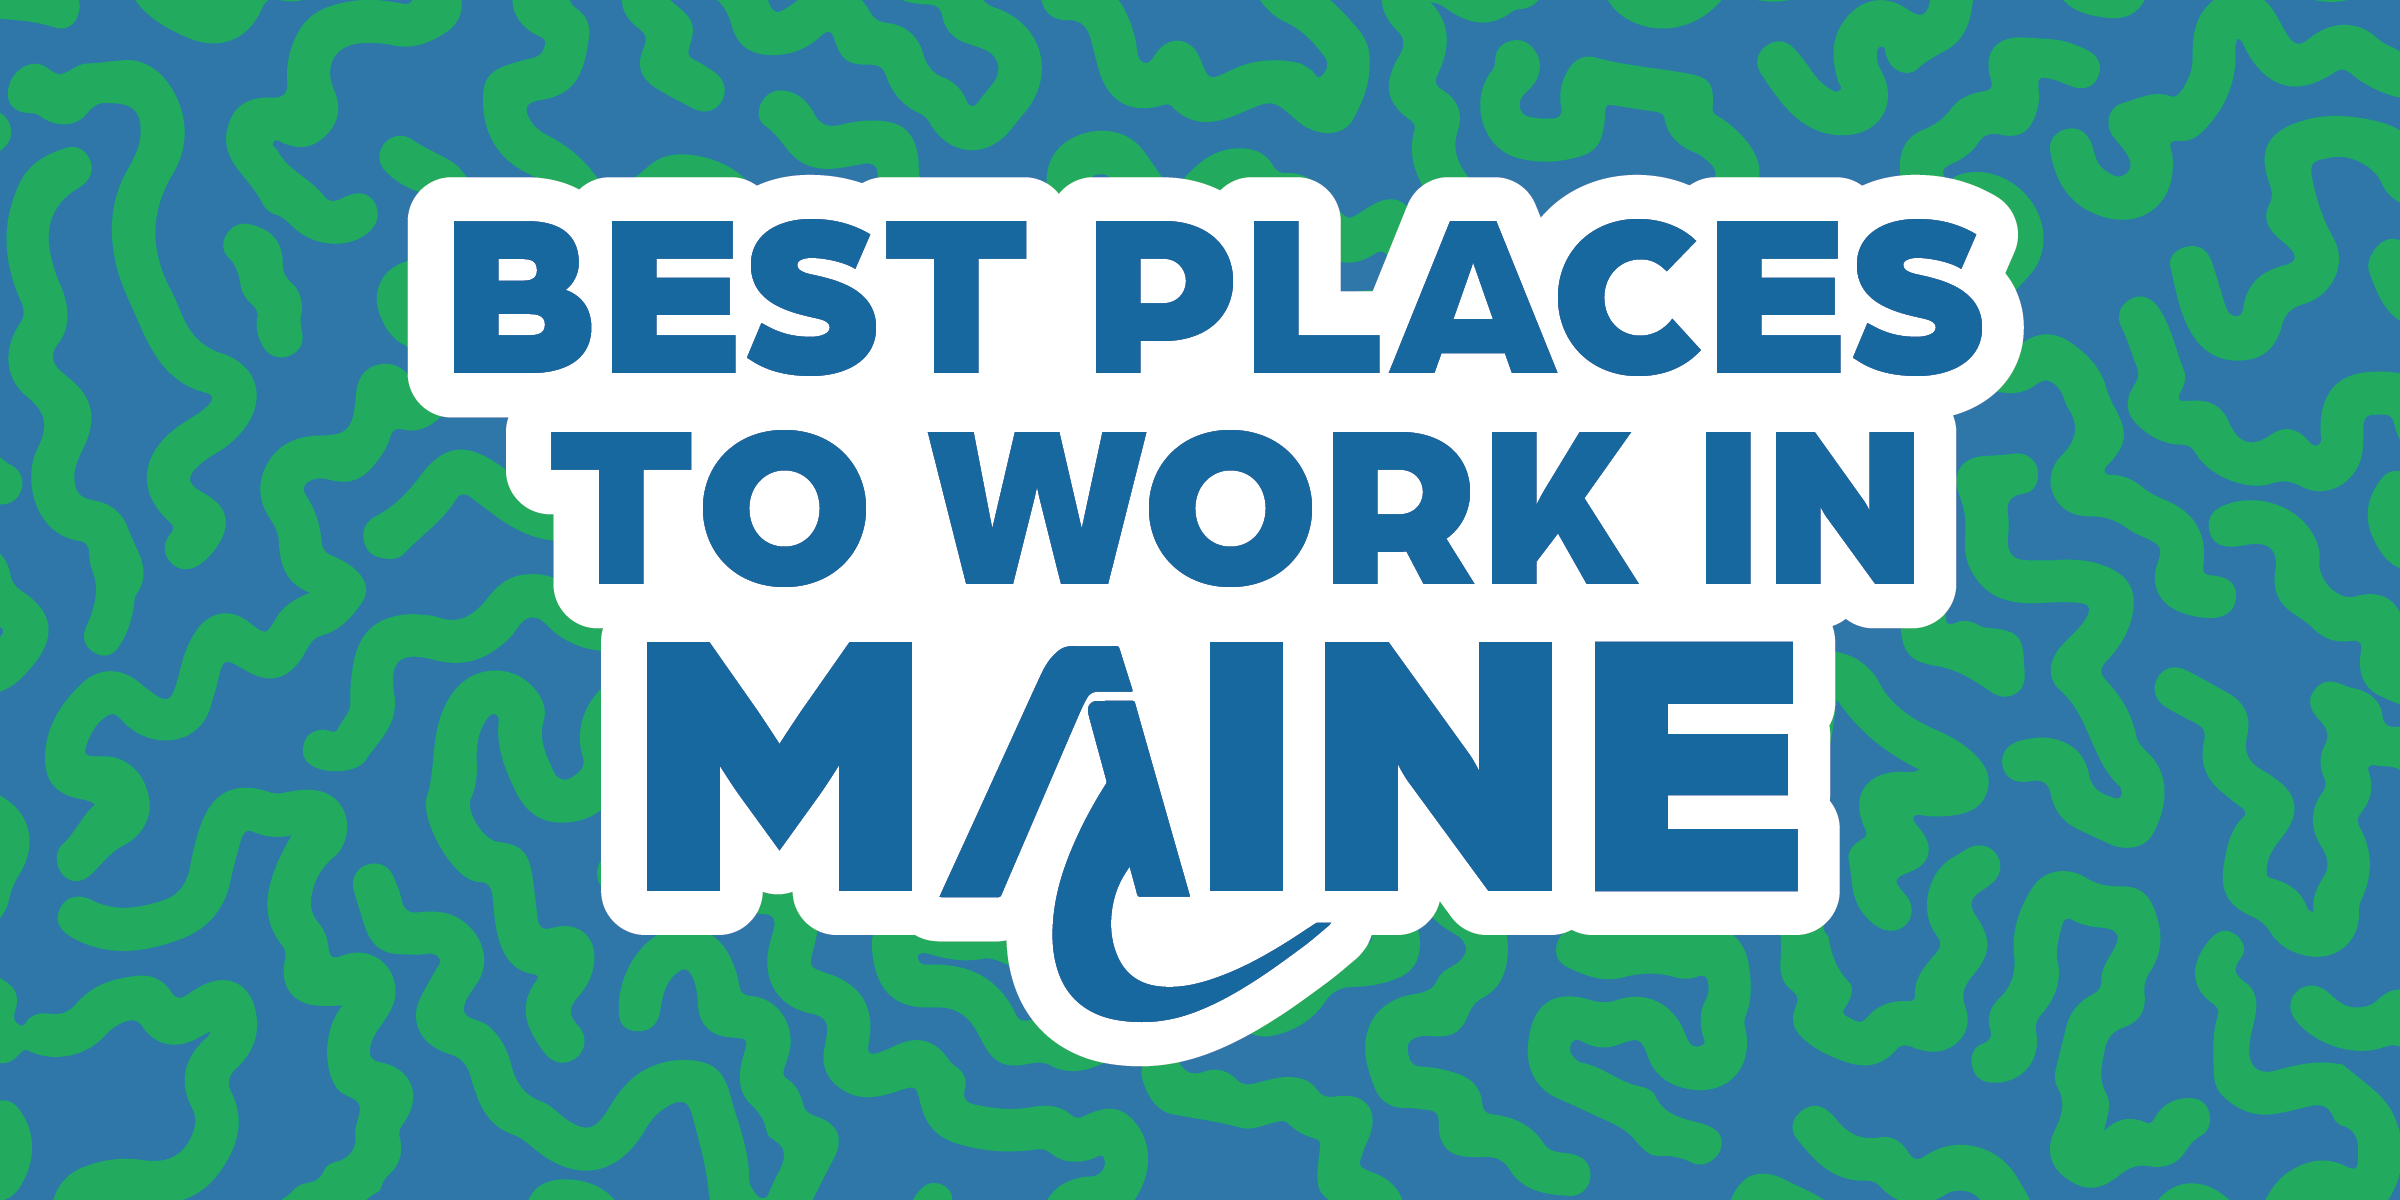 ATX Advisory Services Recognized as 8th Best Place to Work in Maine